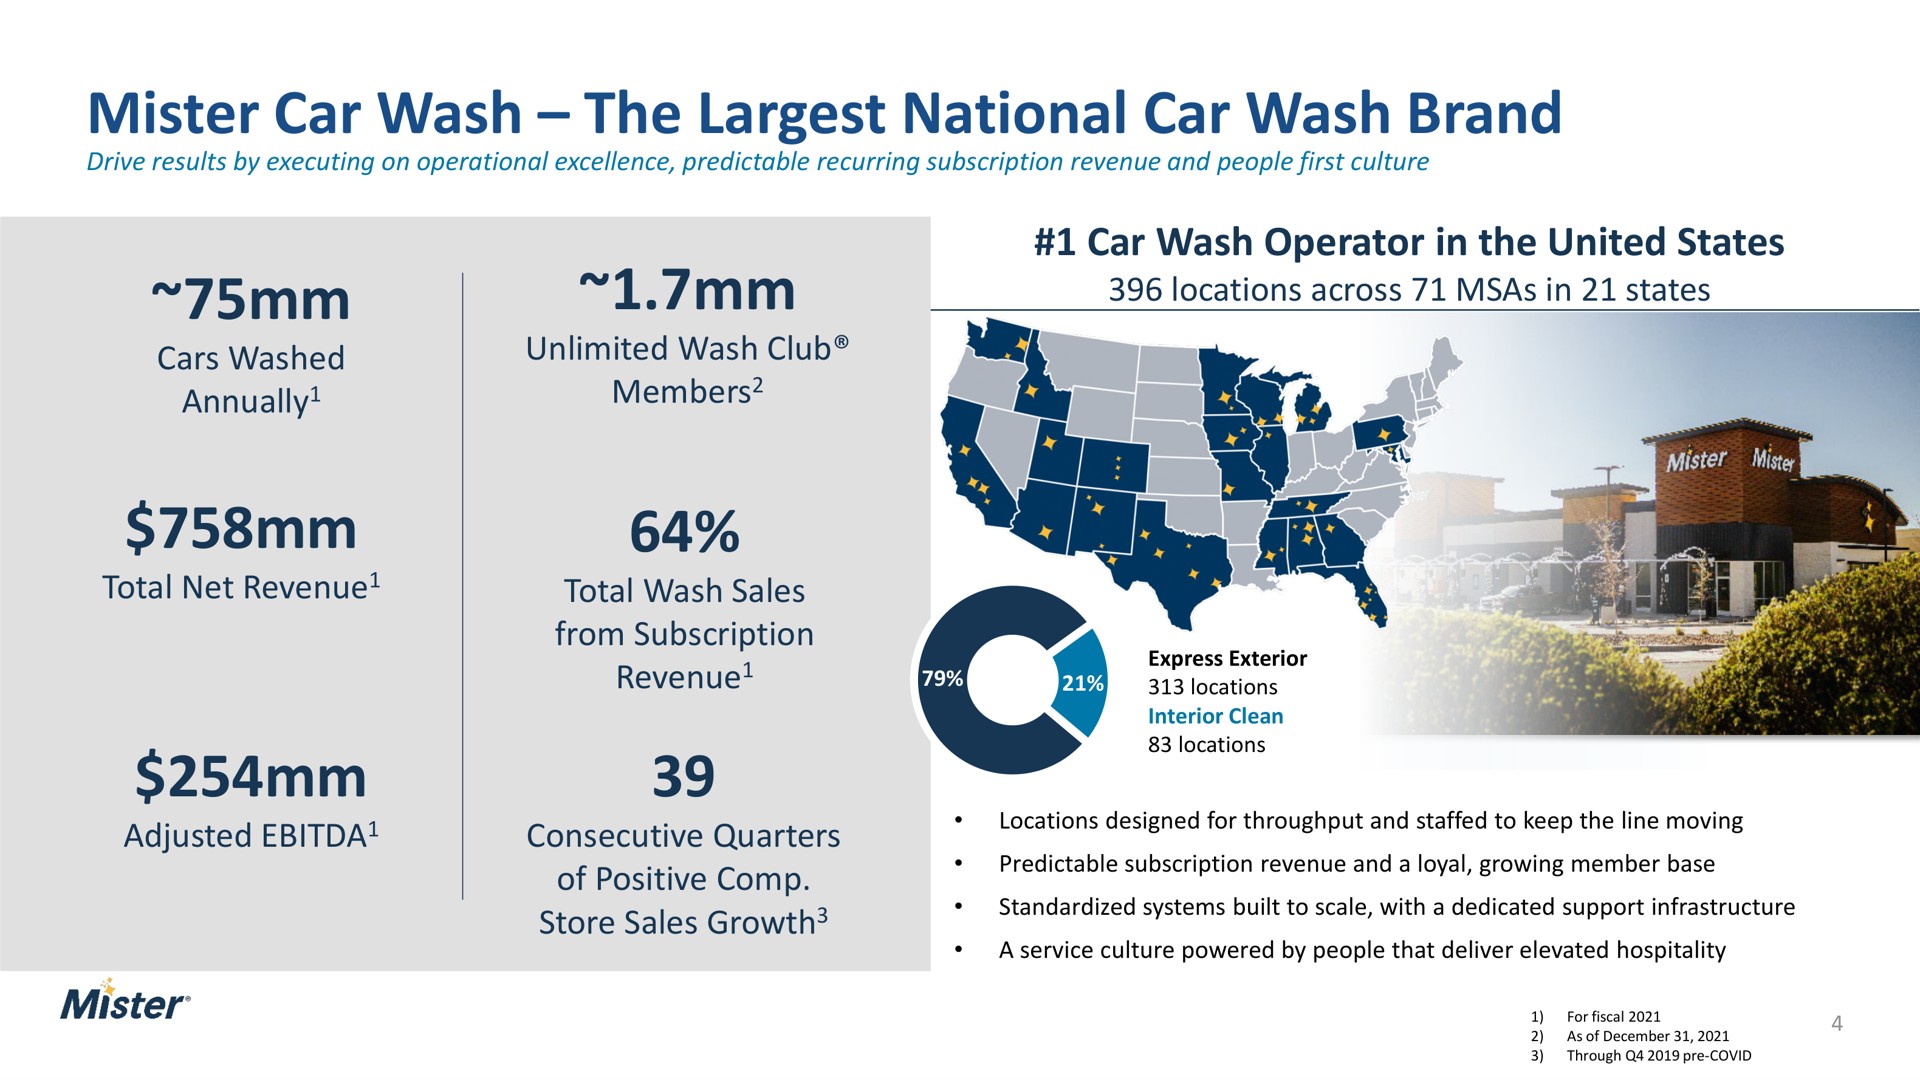 mister car wash the national car wash brand cars washed annually unlimited wash club members total net revenue adjusted total wash sales from subscription revenue consecutive quarters of positive store sales growth car wash operator in the united states locations across in states annually revenue | Mister Car Wash